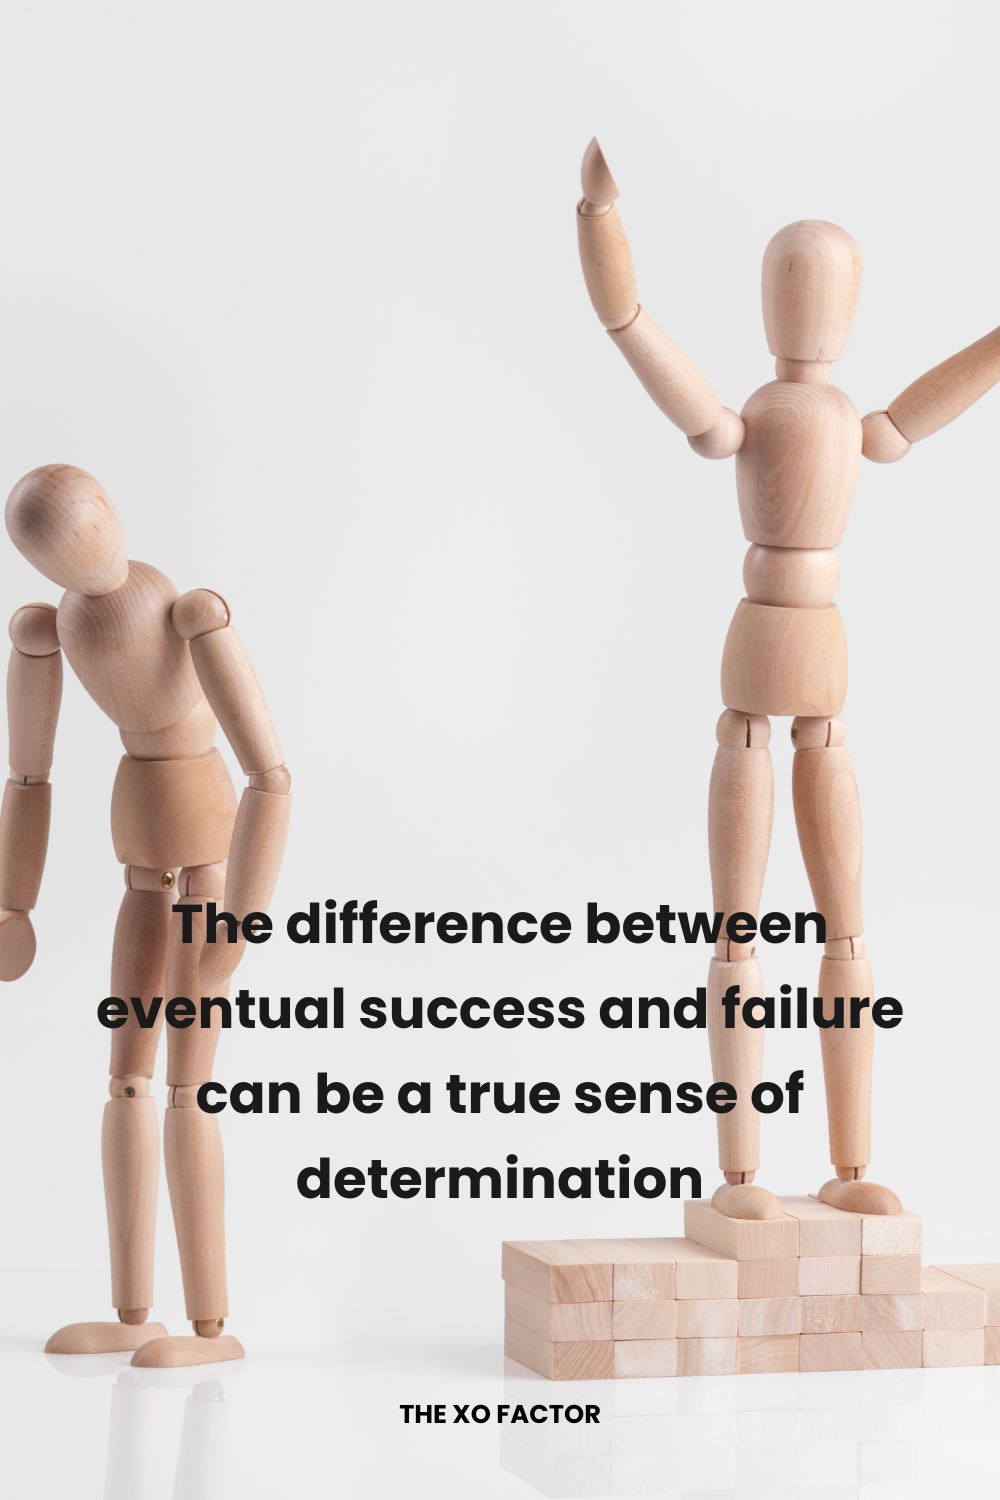 The difference between eventual success and failure can be a true sense of determination